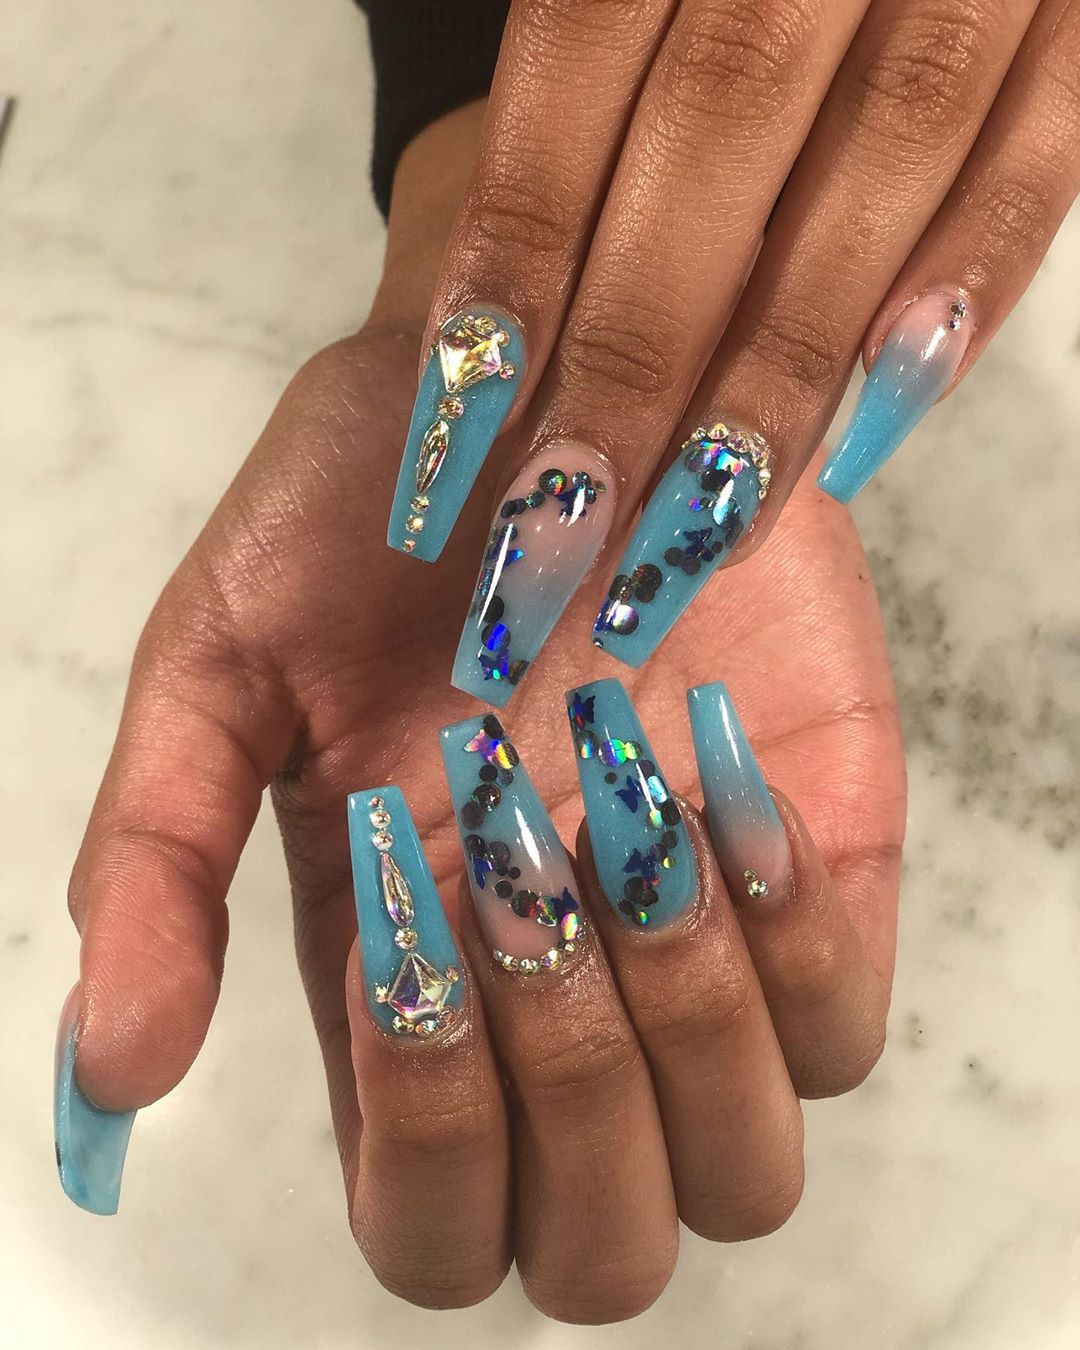 Blue Ombre Nails with Jewel Motif